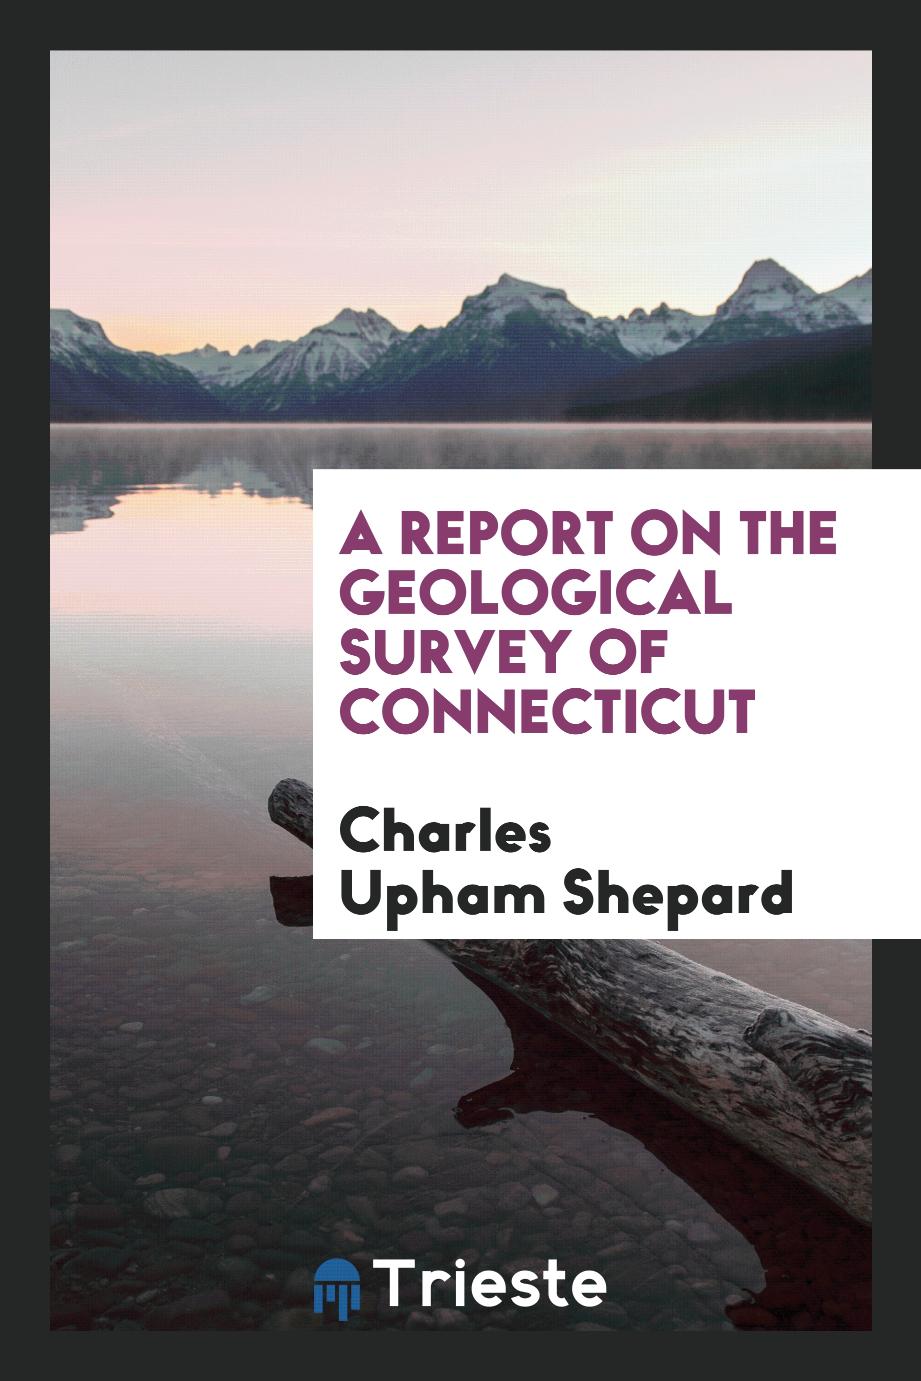 Charles Upham Shepard - A report on the geological survey of Connecticut